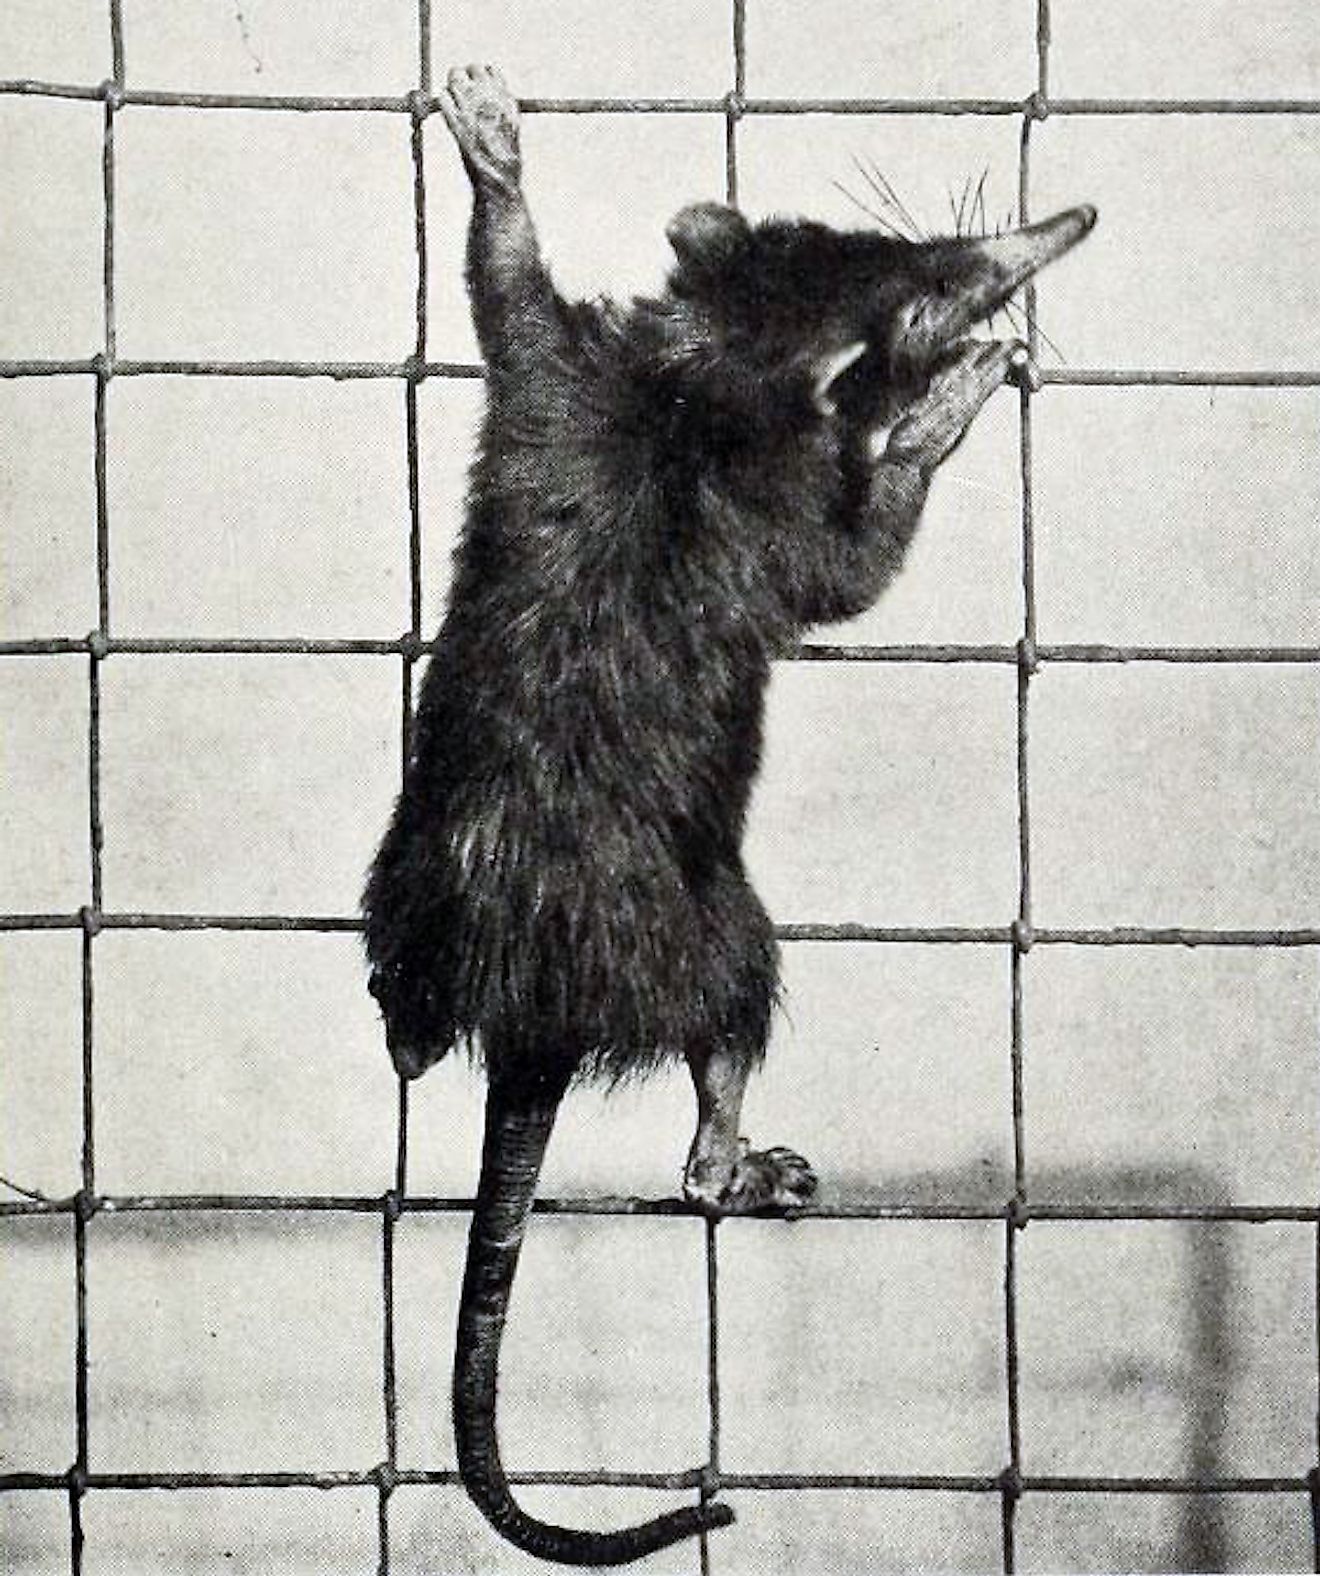 Specimen of a Cuban solenodon at the New York Zoo. Image credit: New York Zoological Society (present-day Wildlife Conservation Society)